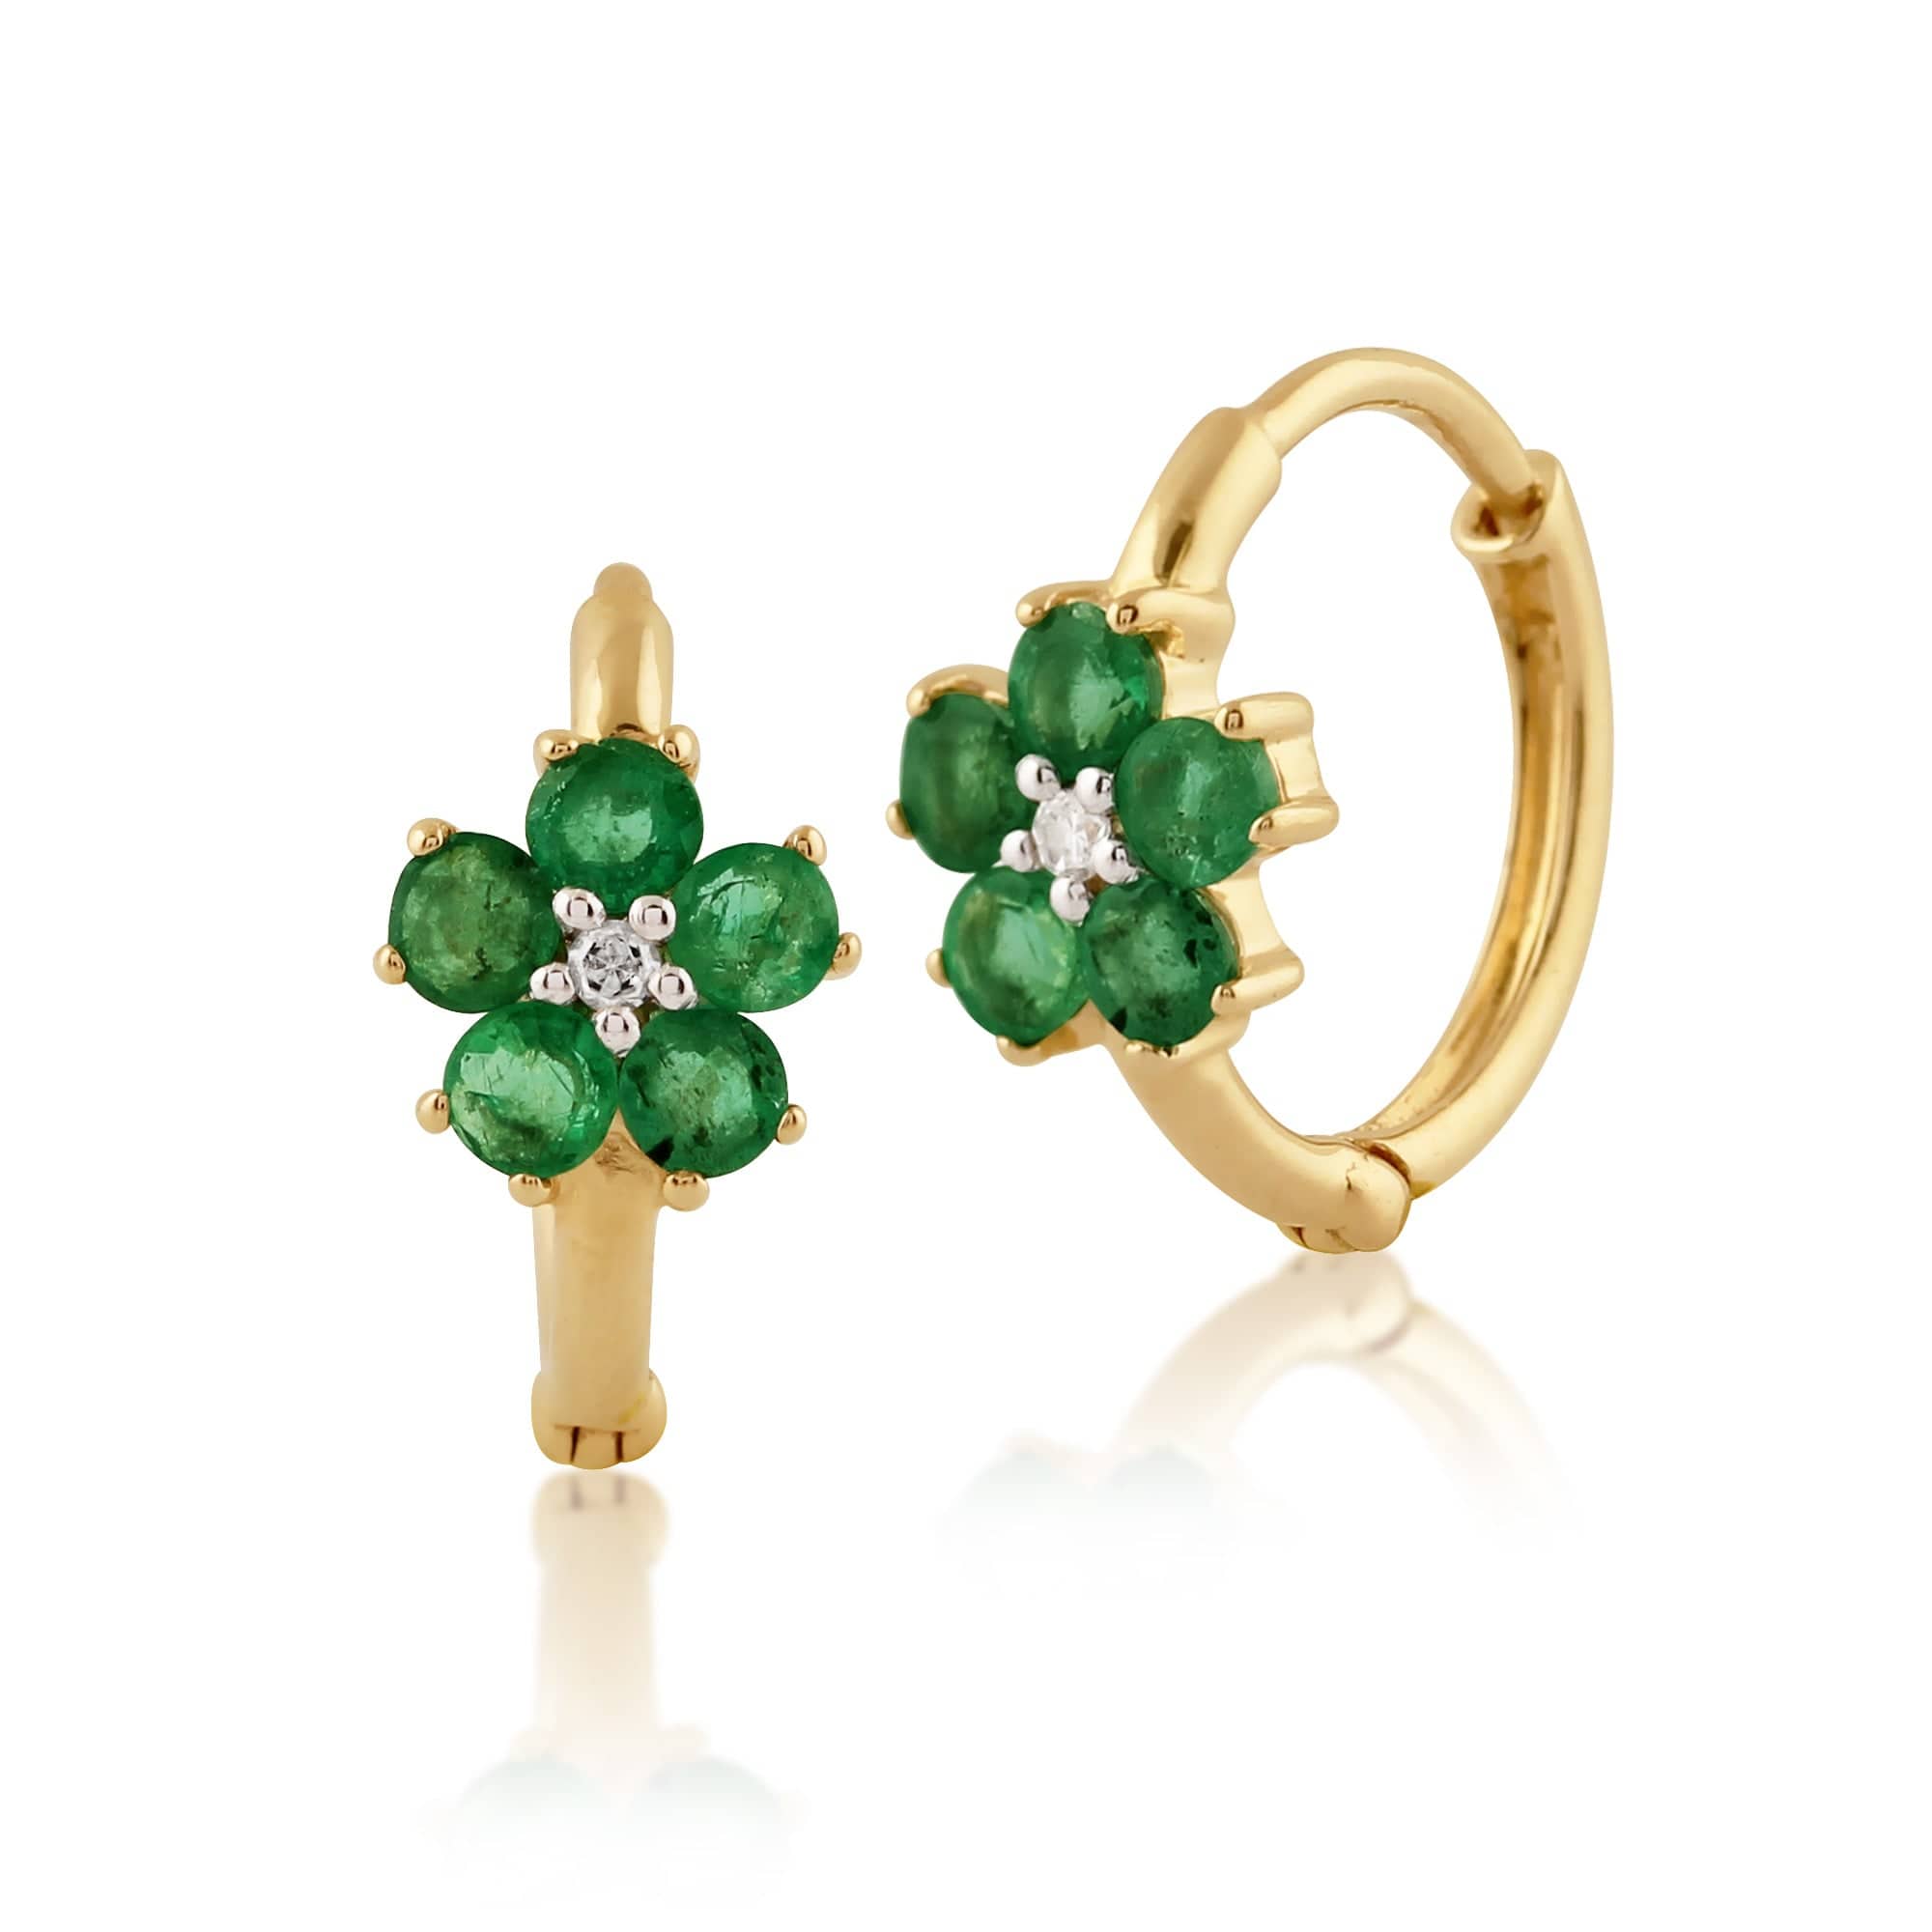 Floral Round Emerald & Diamond Hoop Earrings in 9ct Yellow Gold